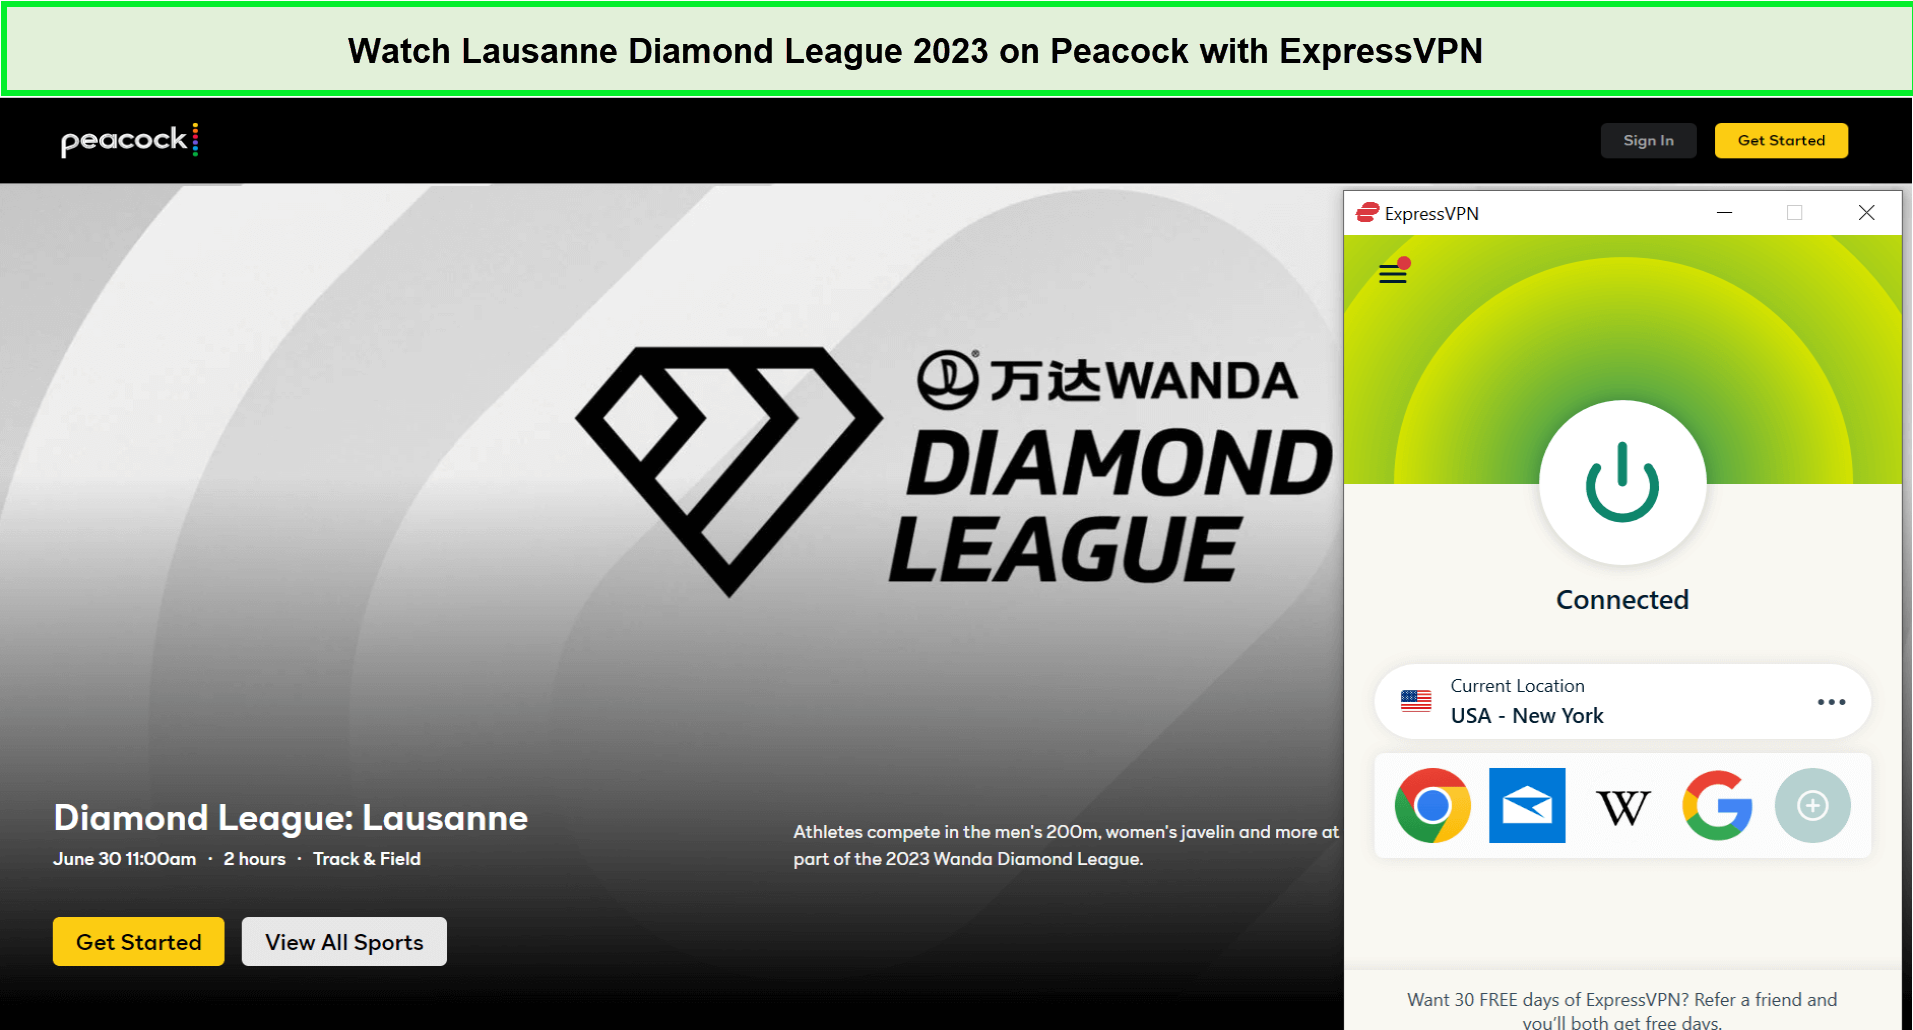 Watch-Lausanne-Diamond-League-2023-in-Spain-on-Peacock-with-ExpressVPN